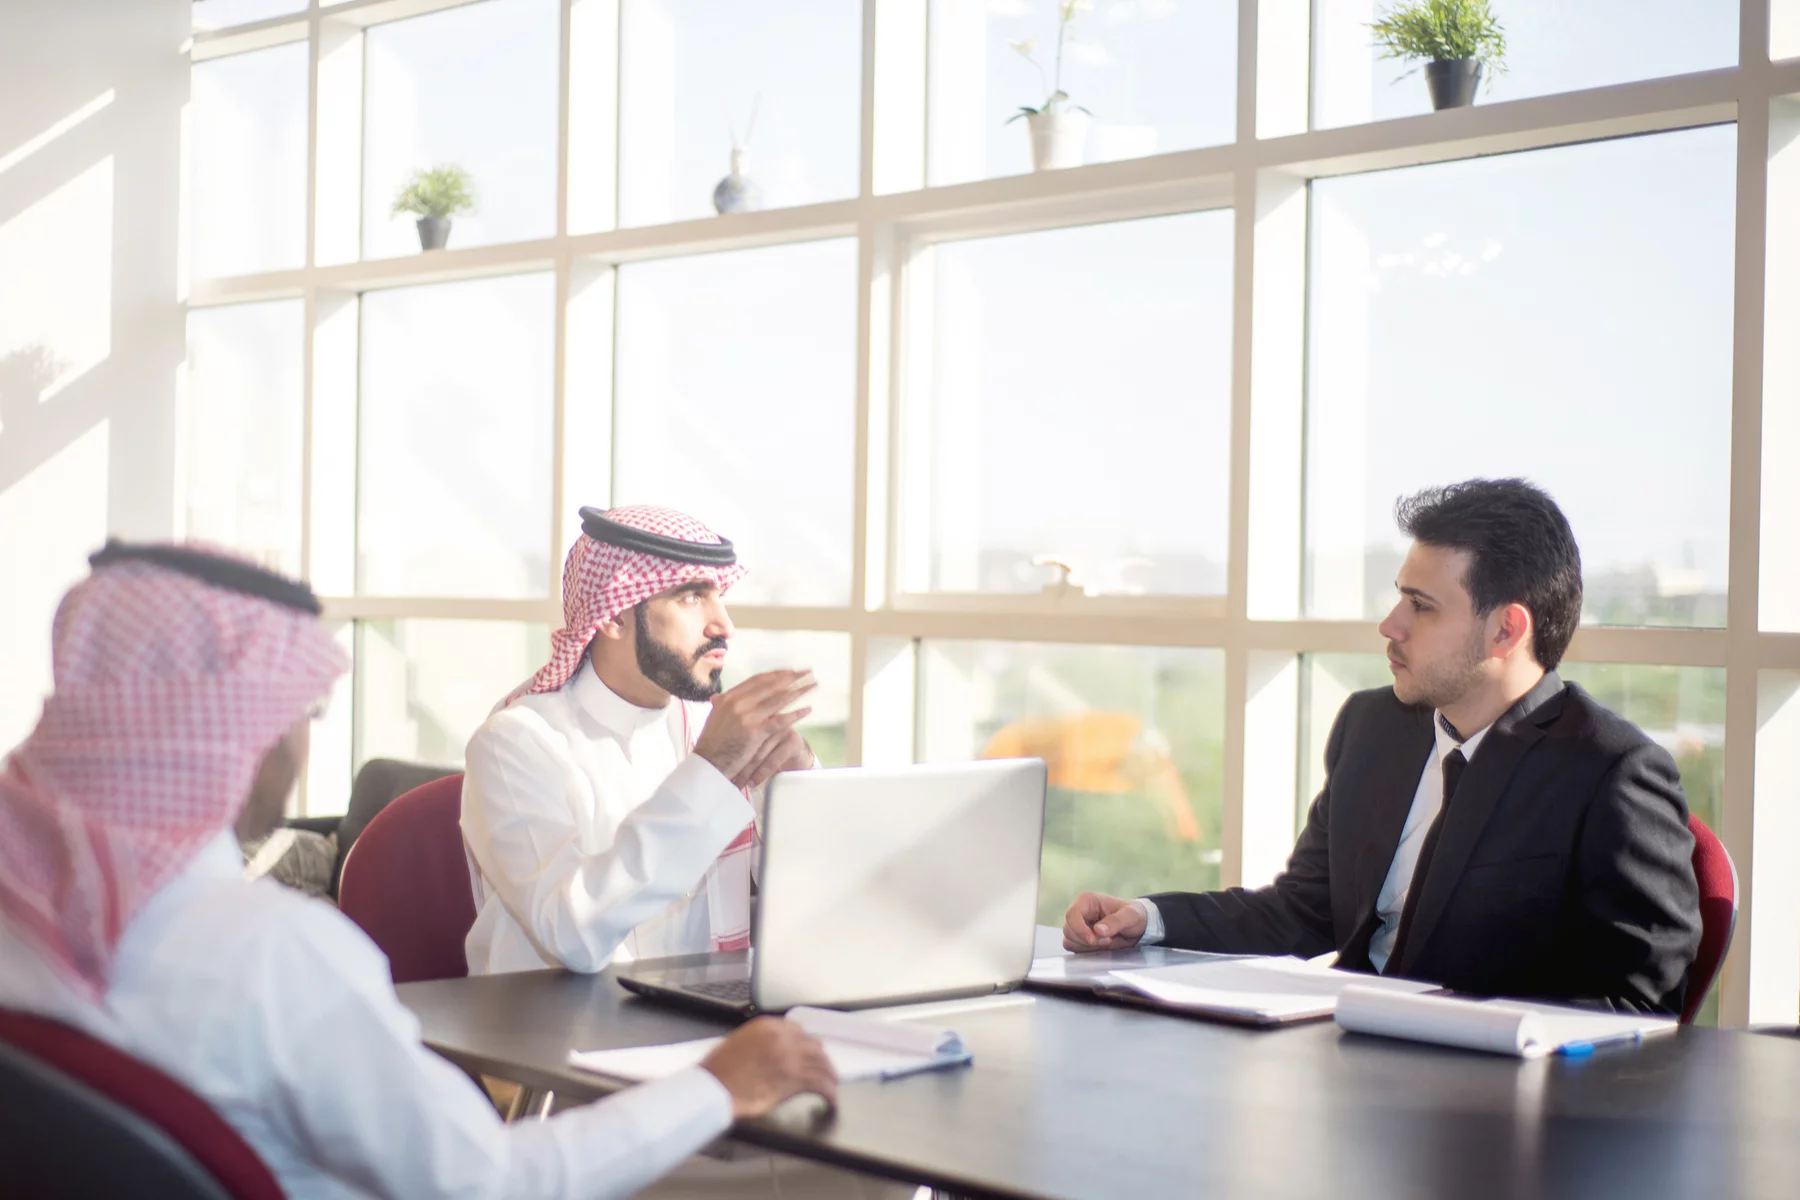 8 Business Ideas That Could Be Successful in Saudi Arabia